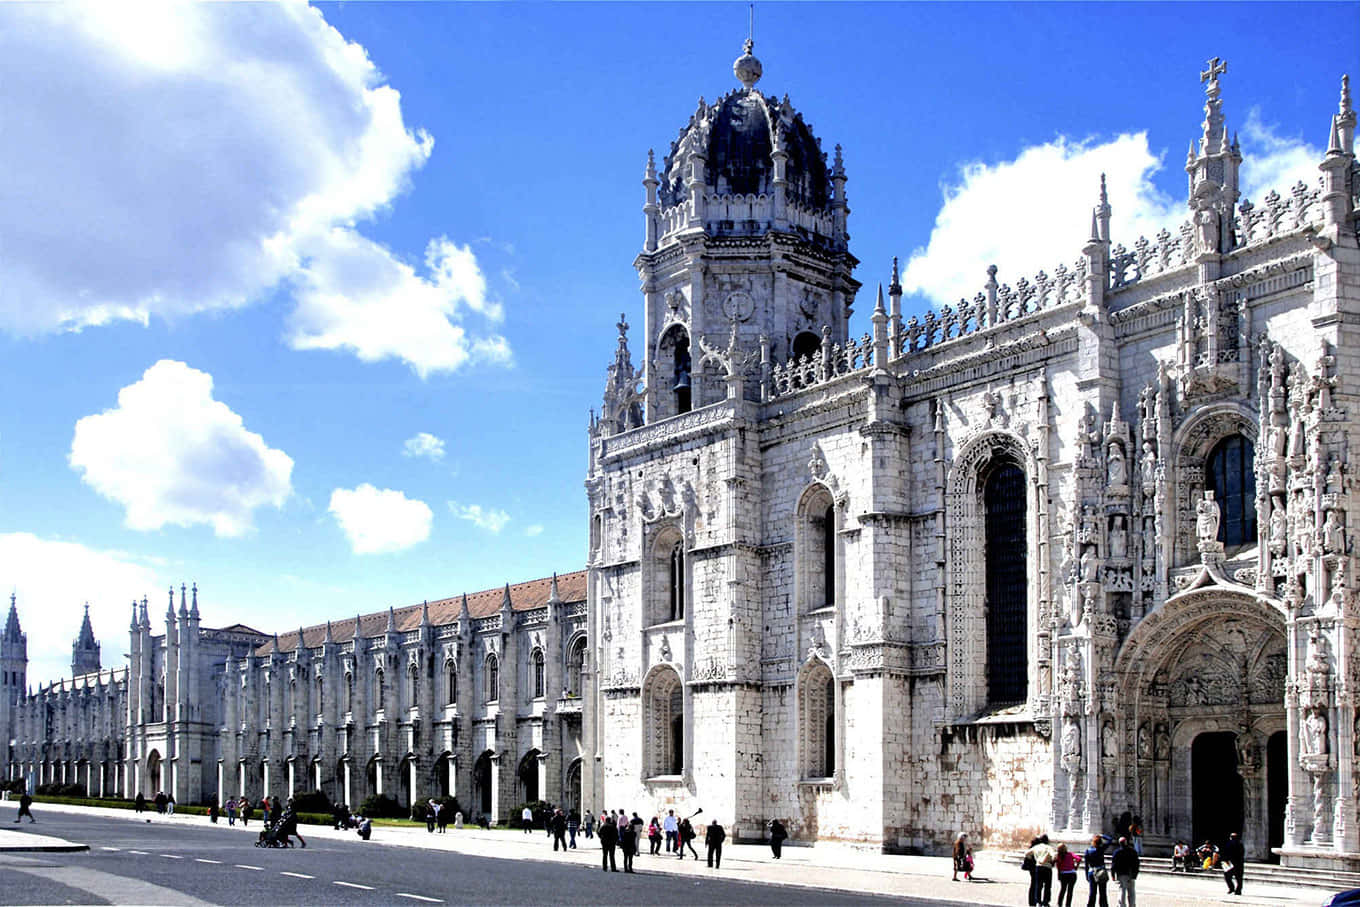 Spectacular view of Mosteiro dos Jeronimos under the radiant sunlight. Wallpaper